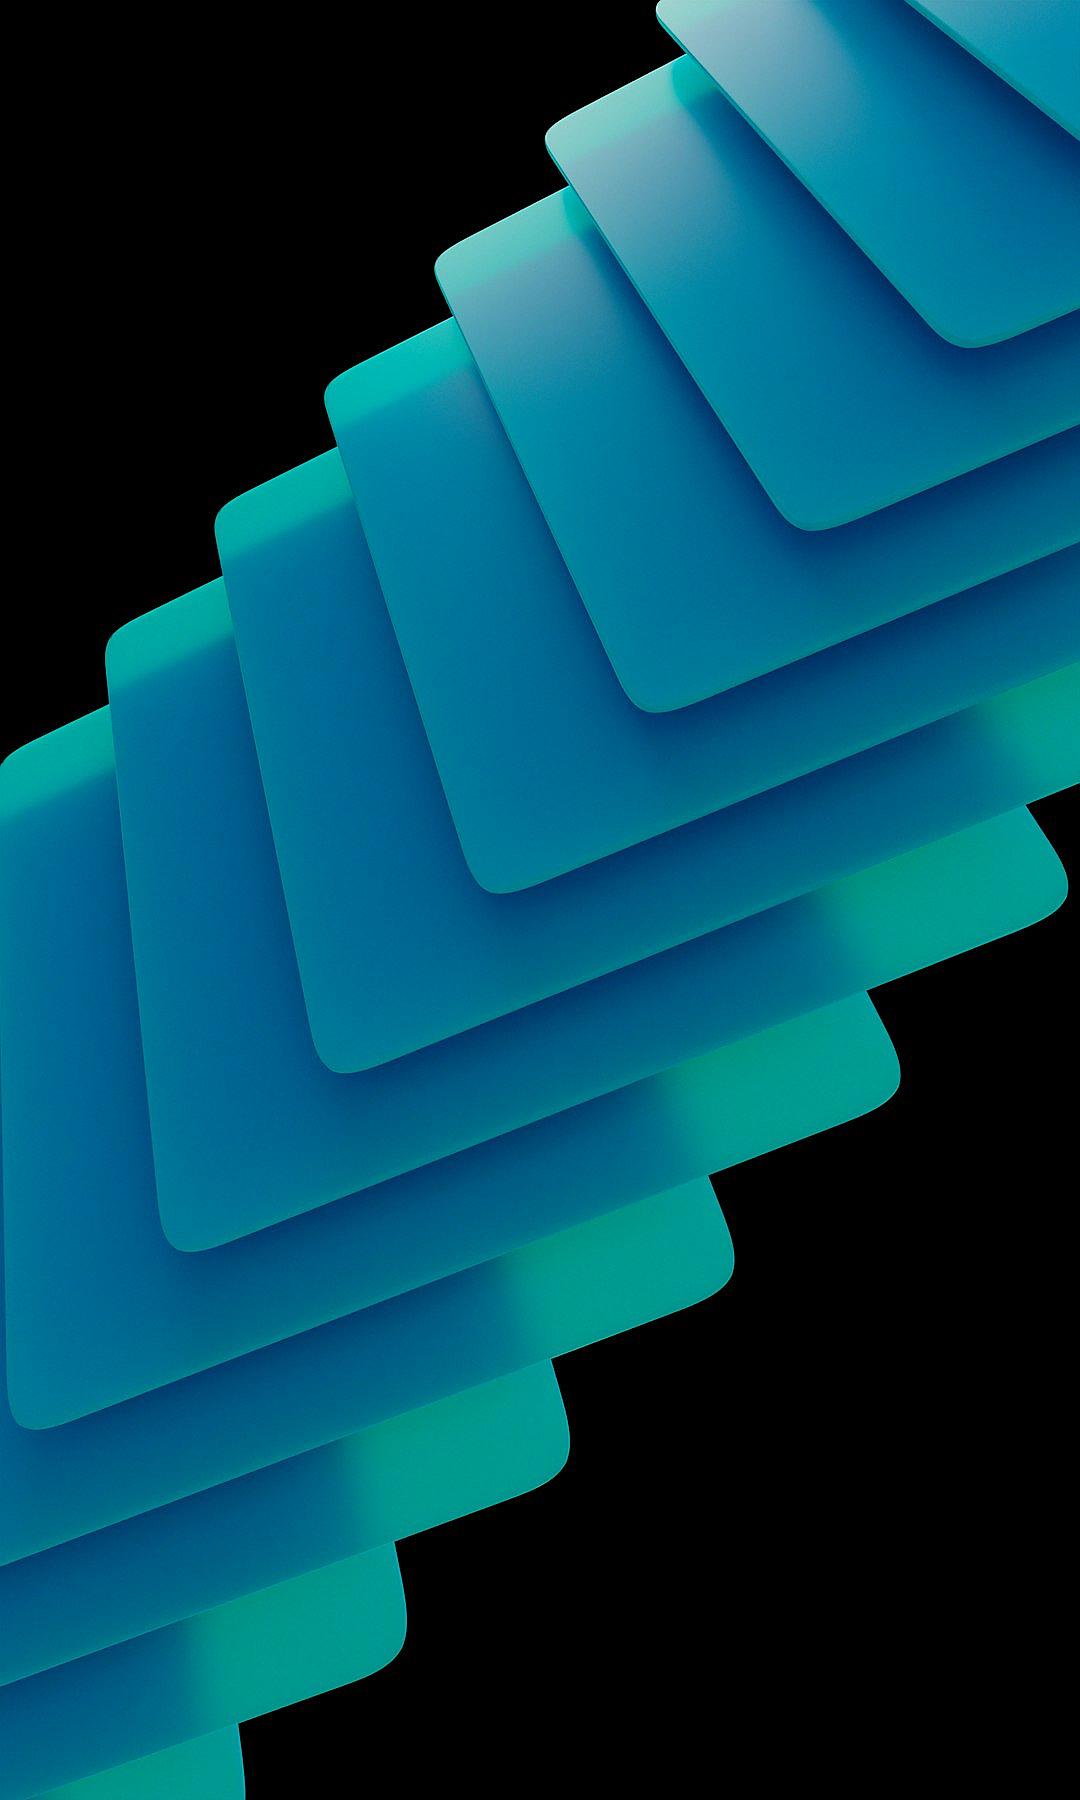 Minimalist abstract background with blue and teal gradients, arranged in overlapping square shapes, on a black backdrop. High resolution digital art in the style of mobile wallpaper or design elements.